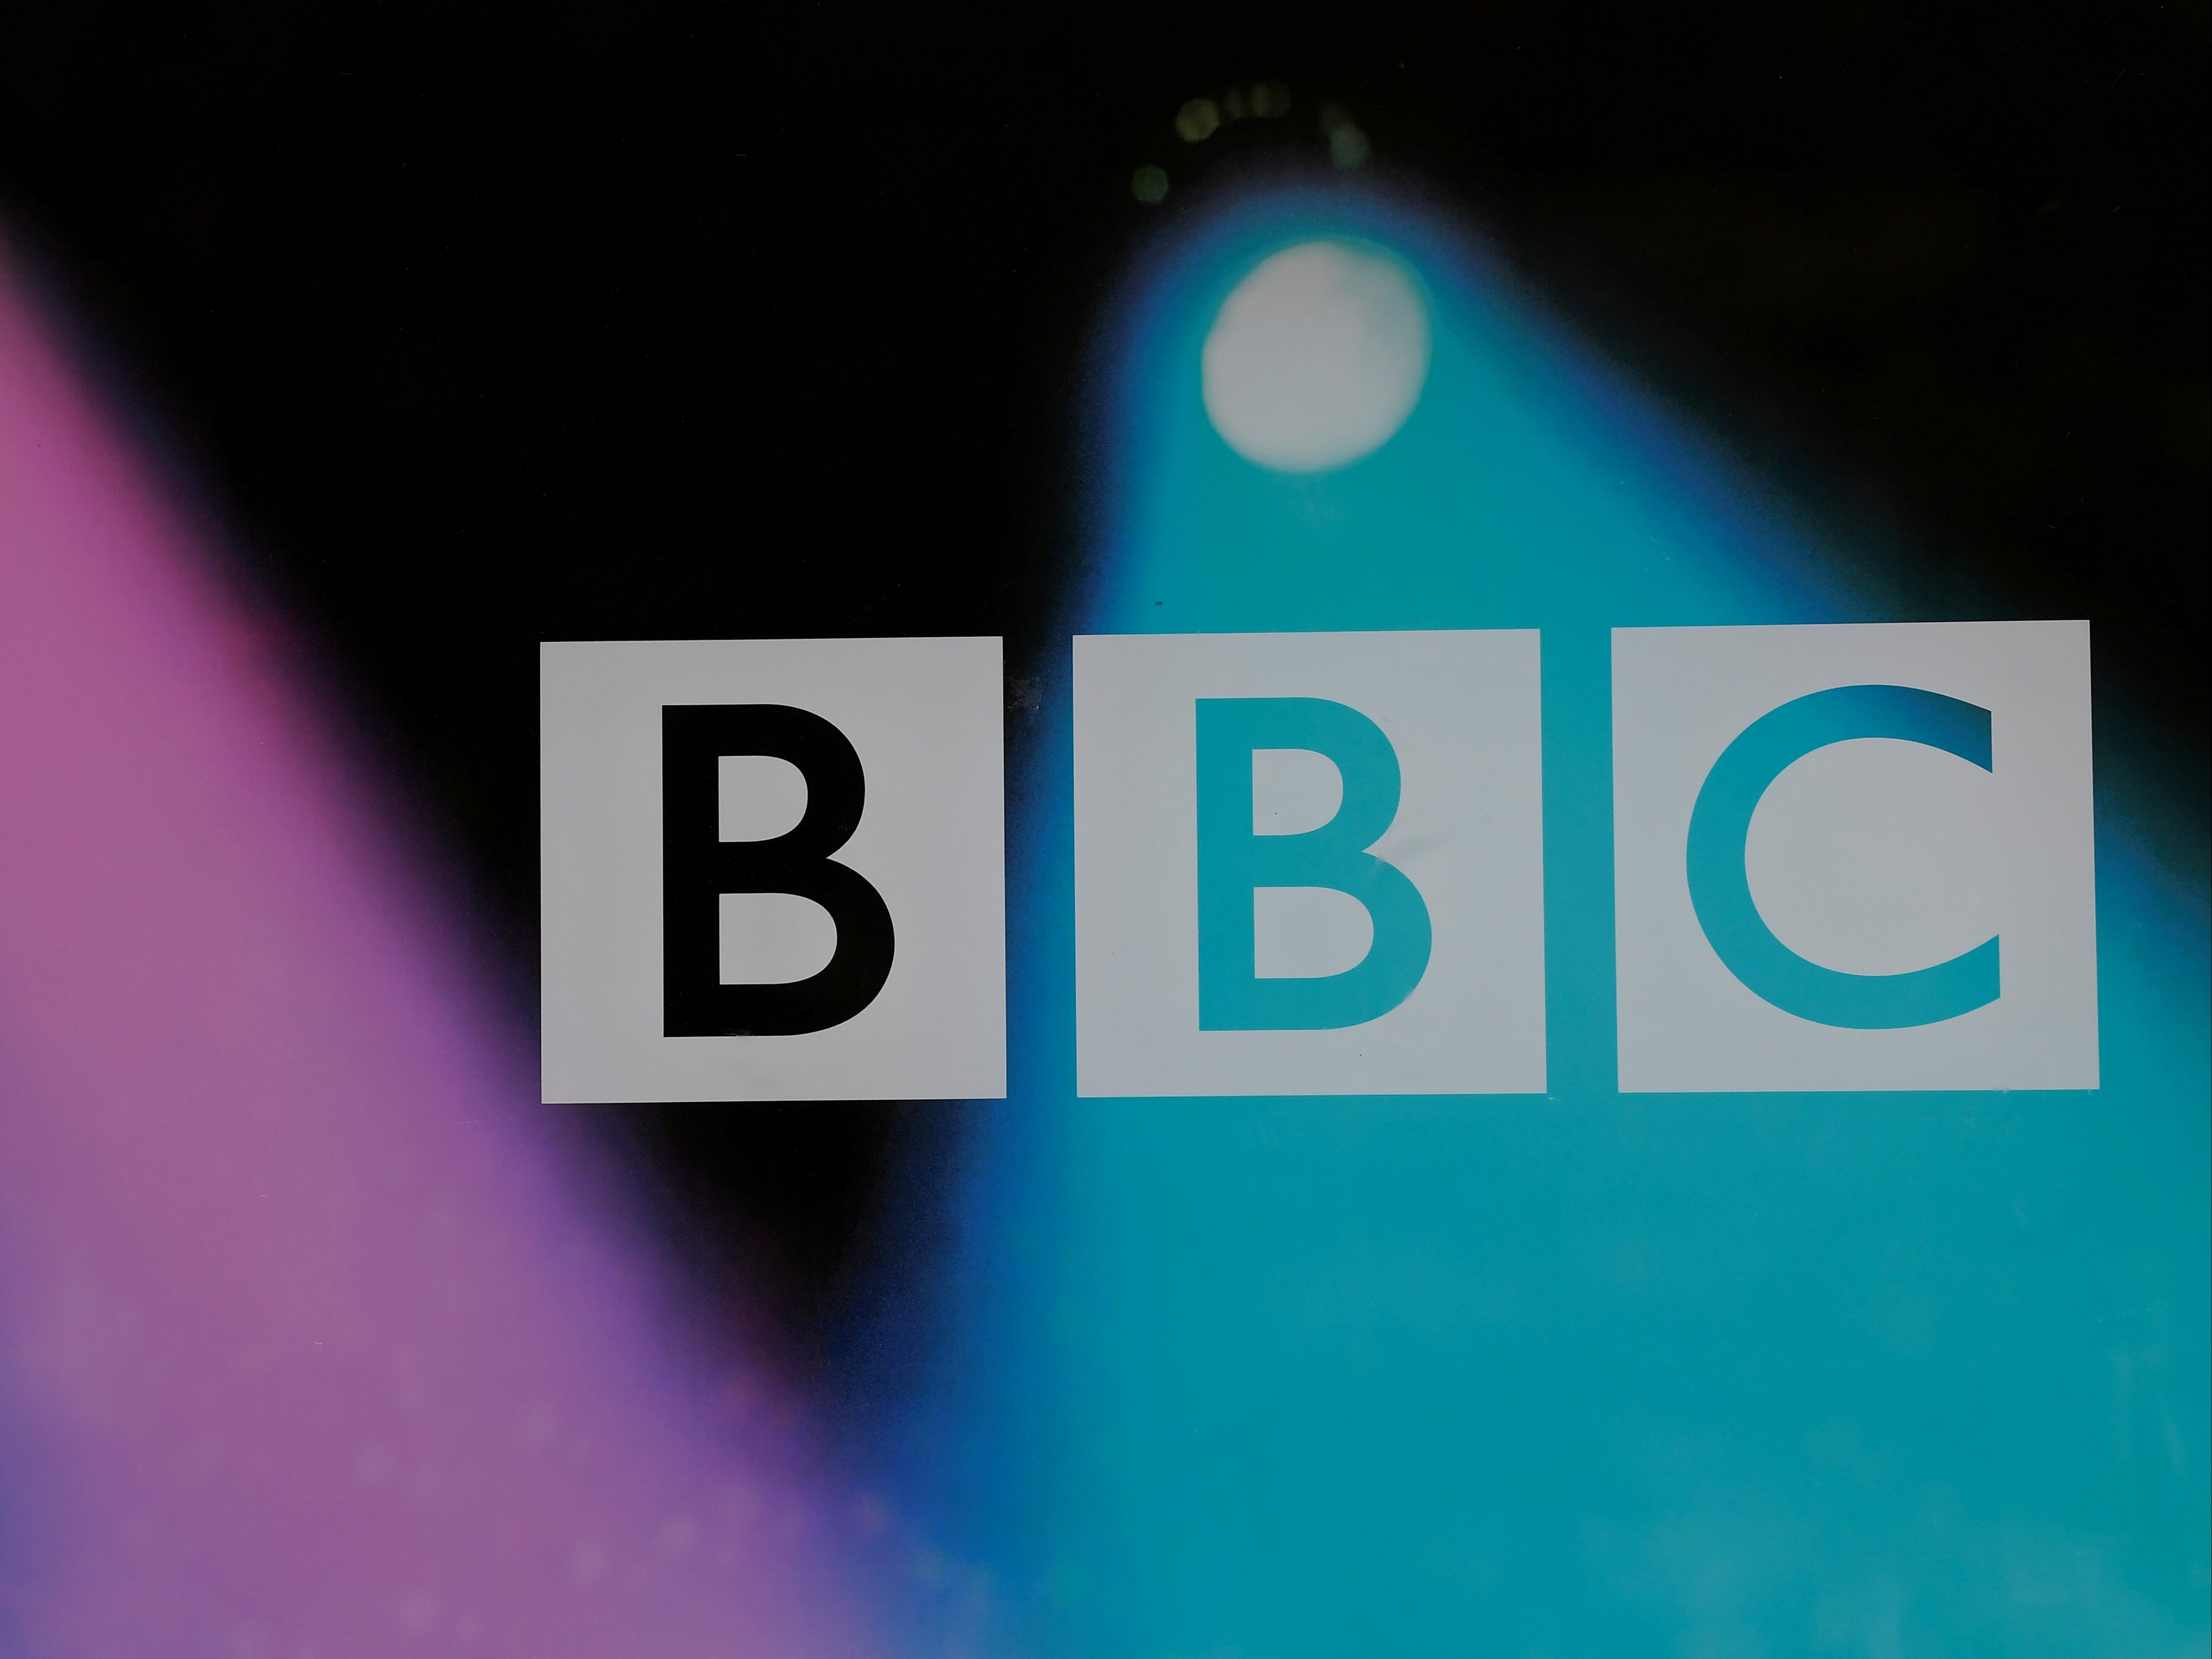 The BBC is reportedly set to donate around £1.5m to charity over the Martin Bashir scandal